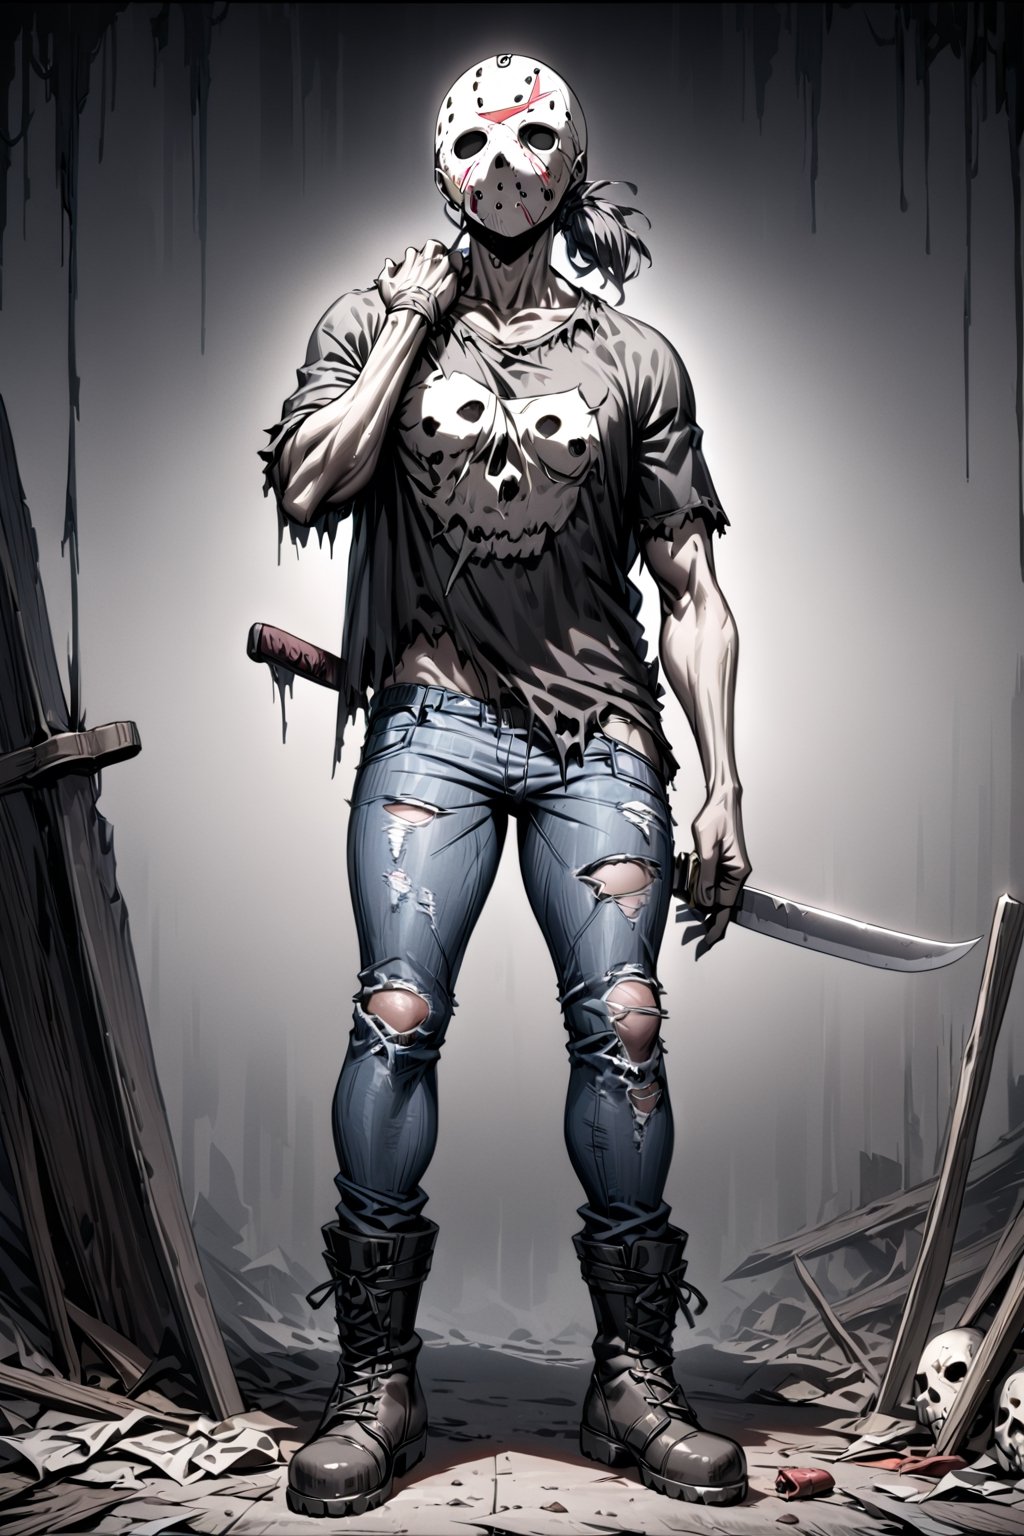 (((full body))), (((NSFW))), (4K image), (ultra quality image), (ultra detailed image), (perfect body), (Super Detailed), character Jason Voorhees from the film Friday the 13th, old torn t-shirt, old torn jeans, old punk boots, dark gray hair tied up,  2 meters tall, strong body, bust size 50, machete in his right hand, and a severed head in his left hand, horror and terror theme,